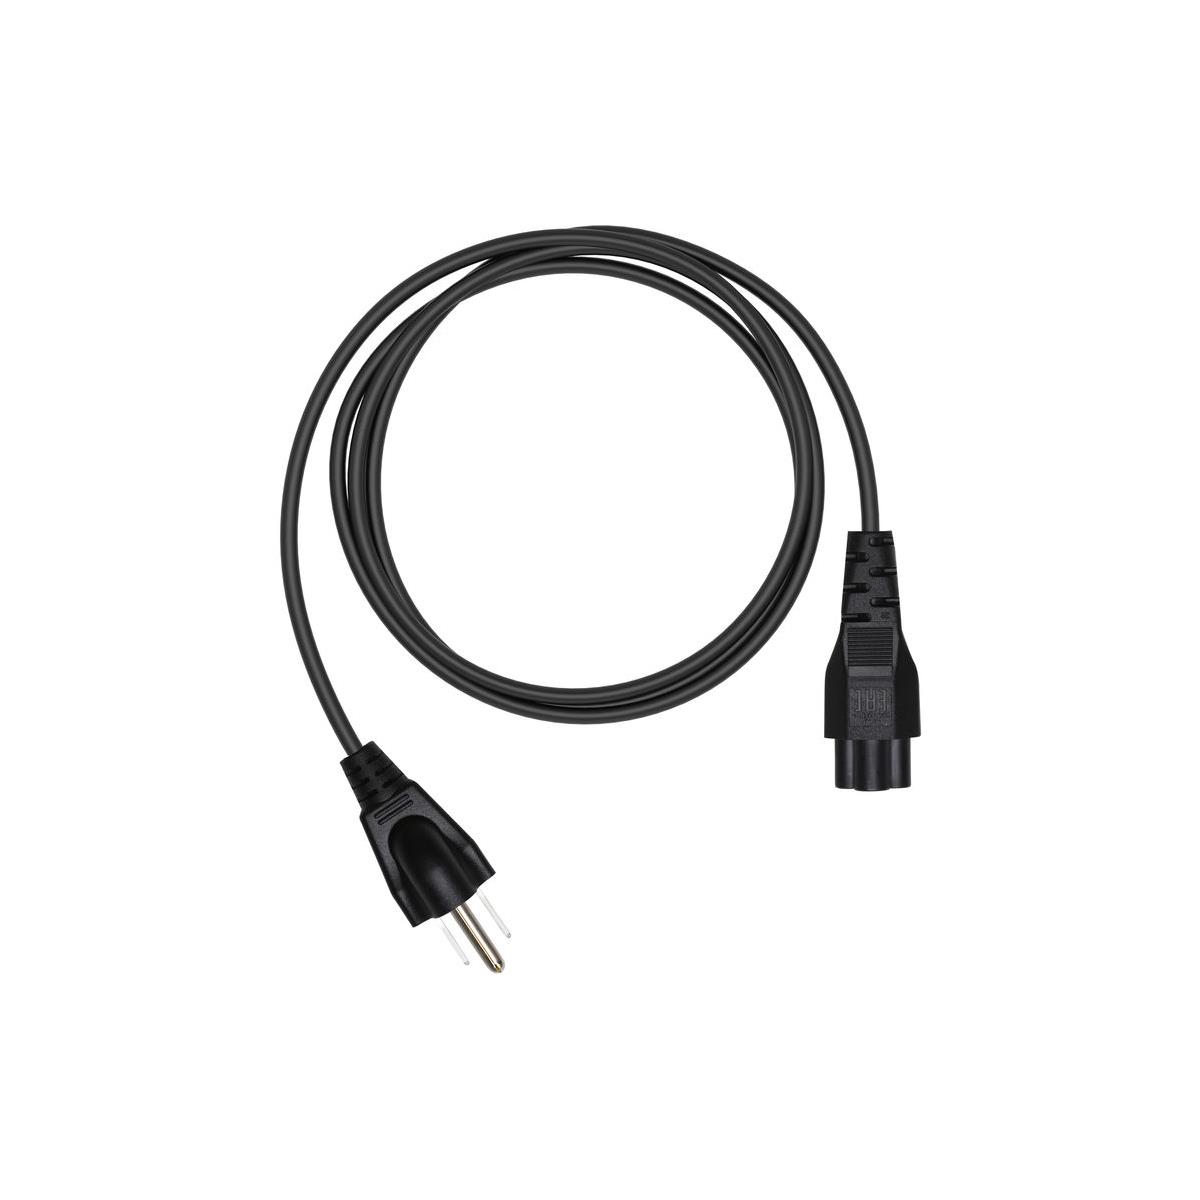 Image of DJI 180W AC Power Adaptor Cable for Inspire 2 Drone (Part 26)